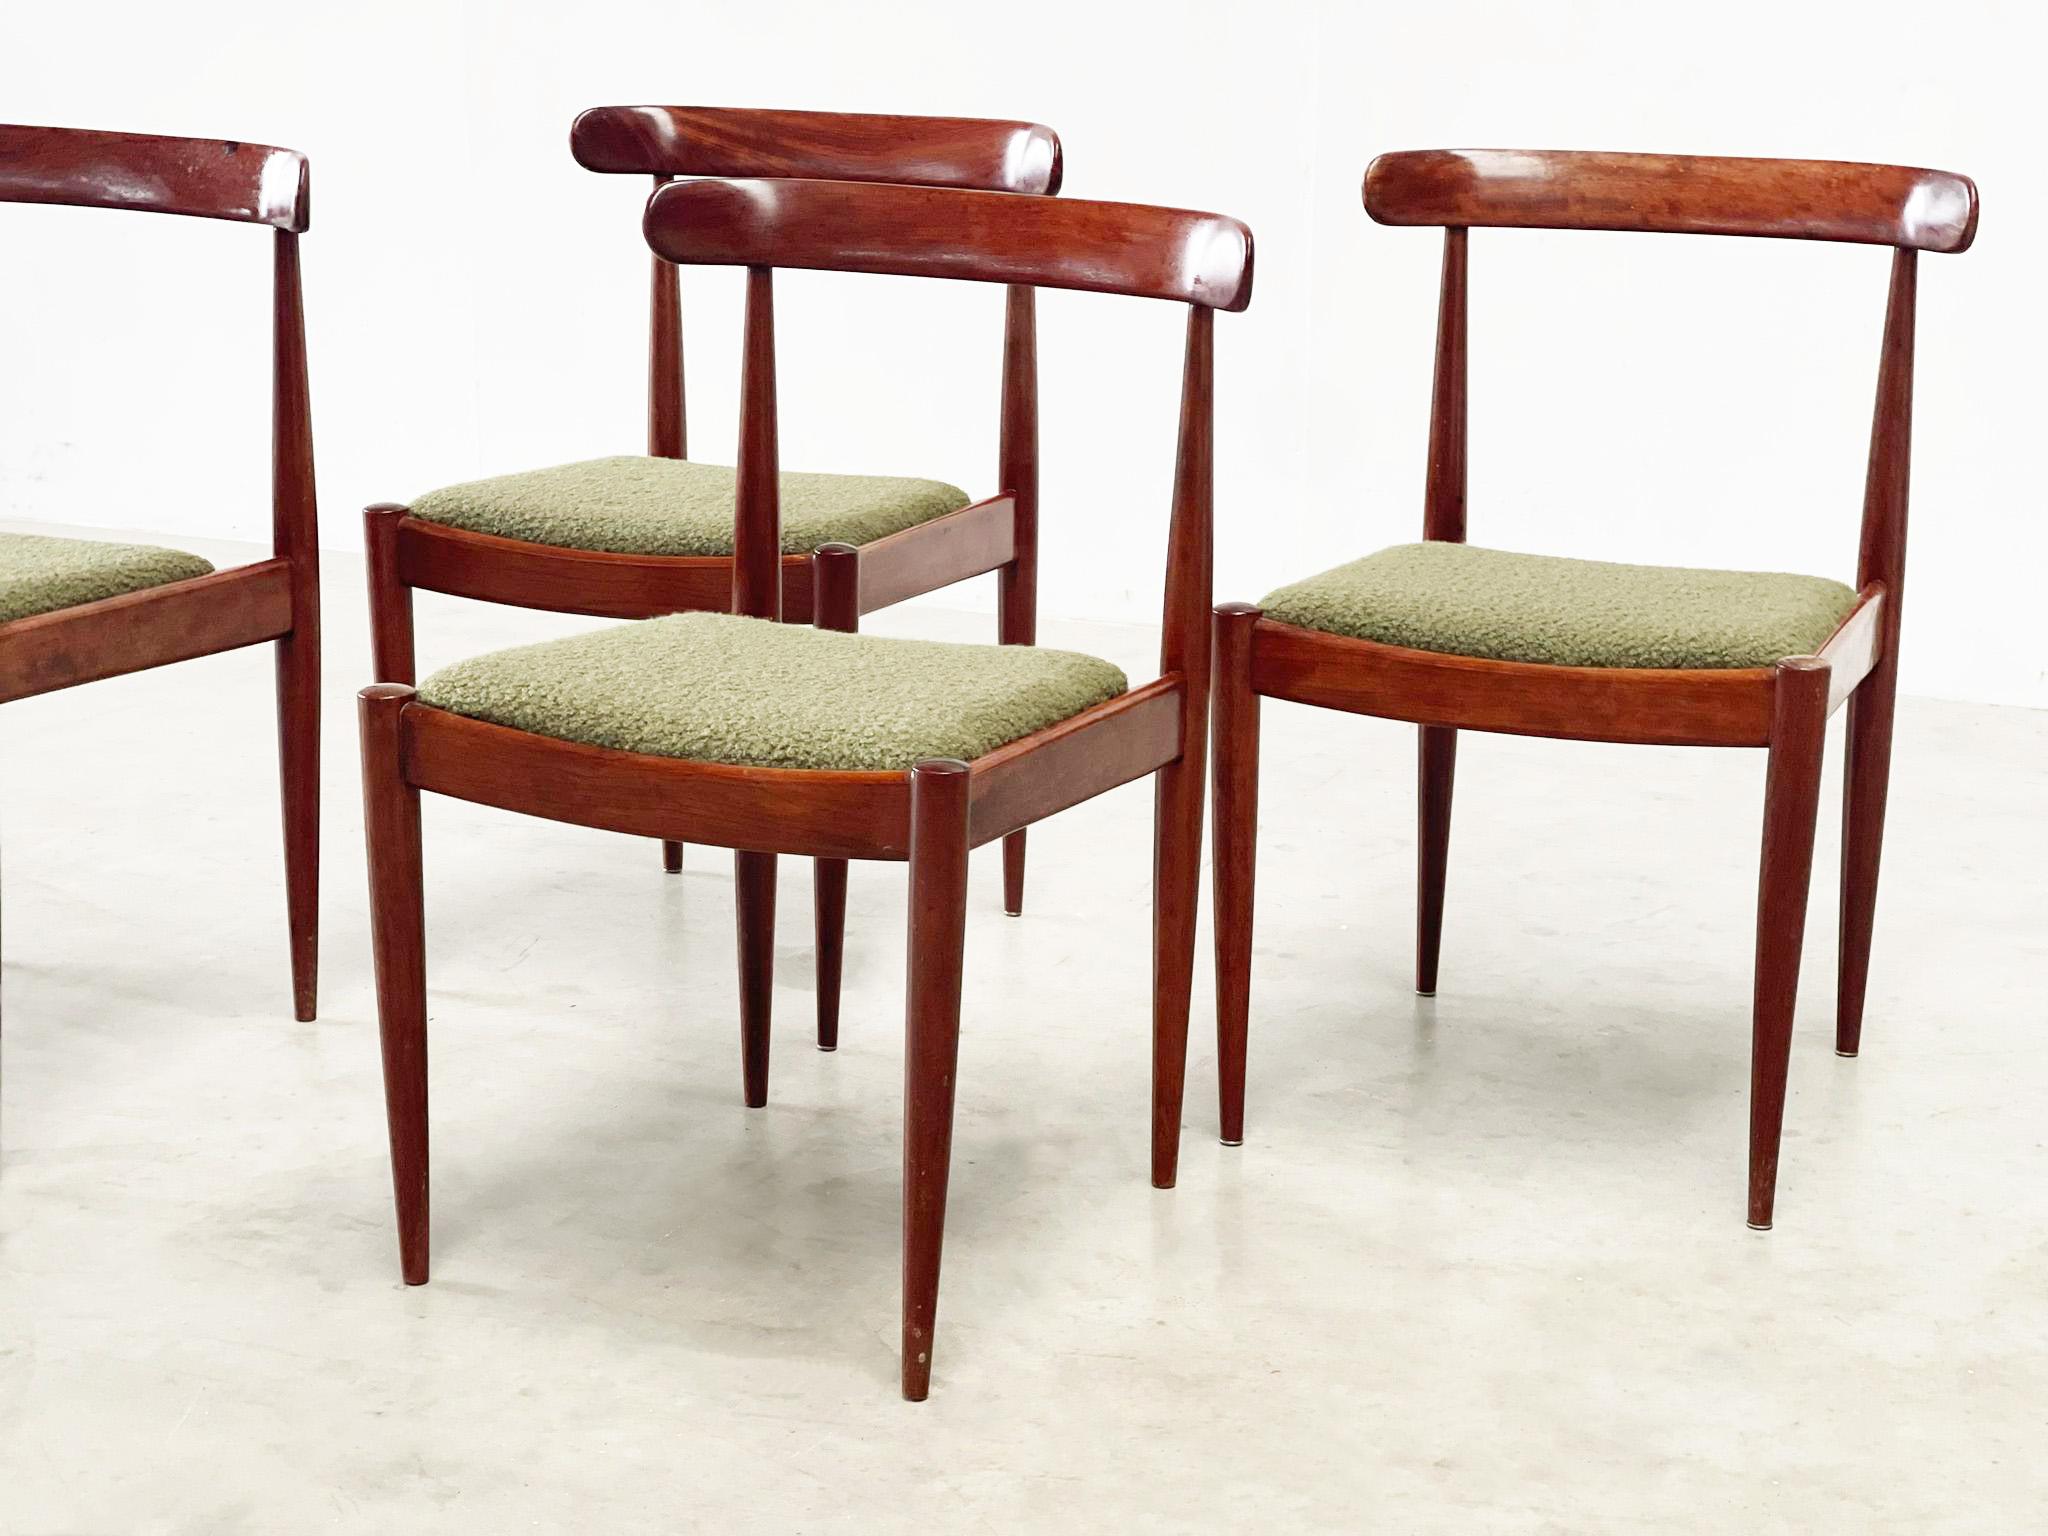 4 wooden dining chairs by Alfred Hendrickx 2